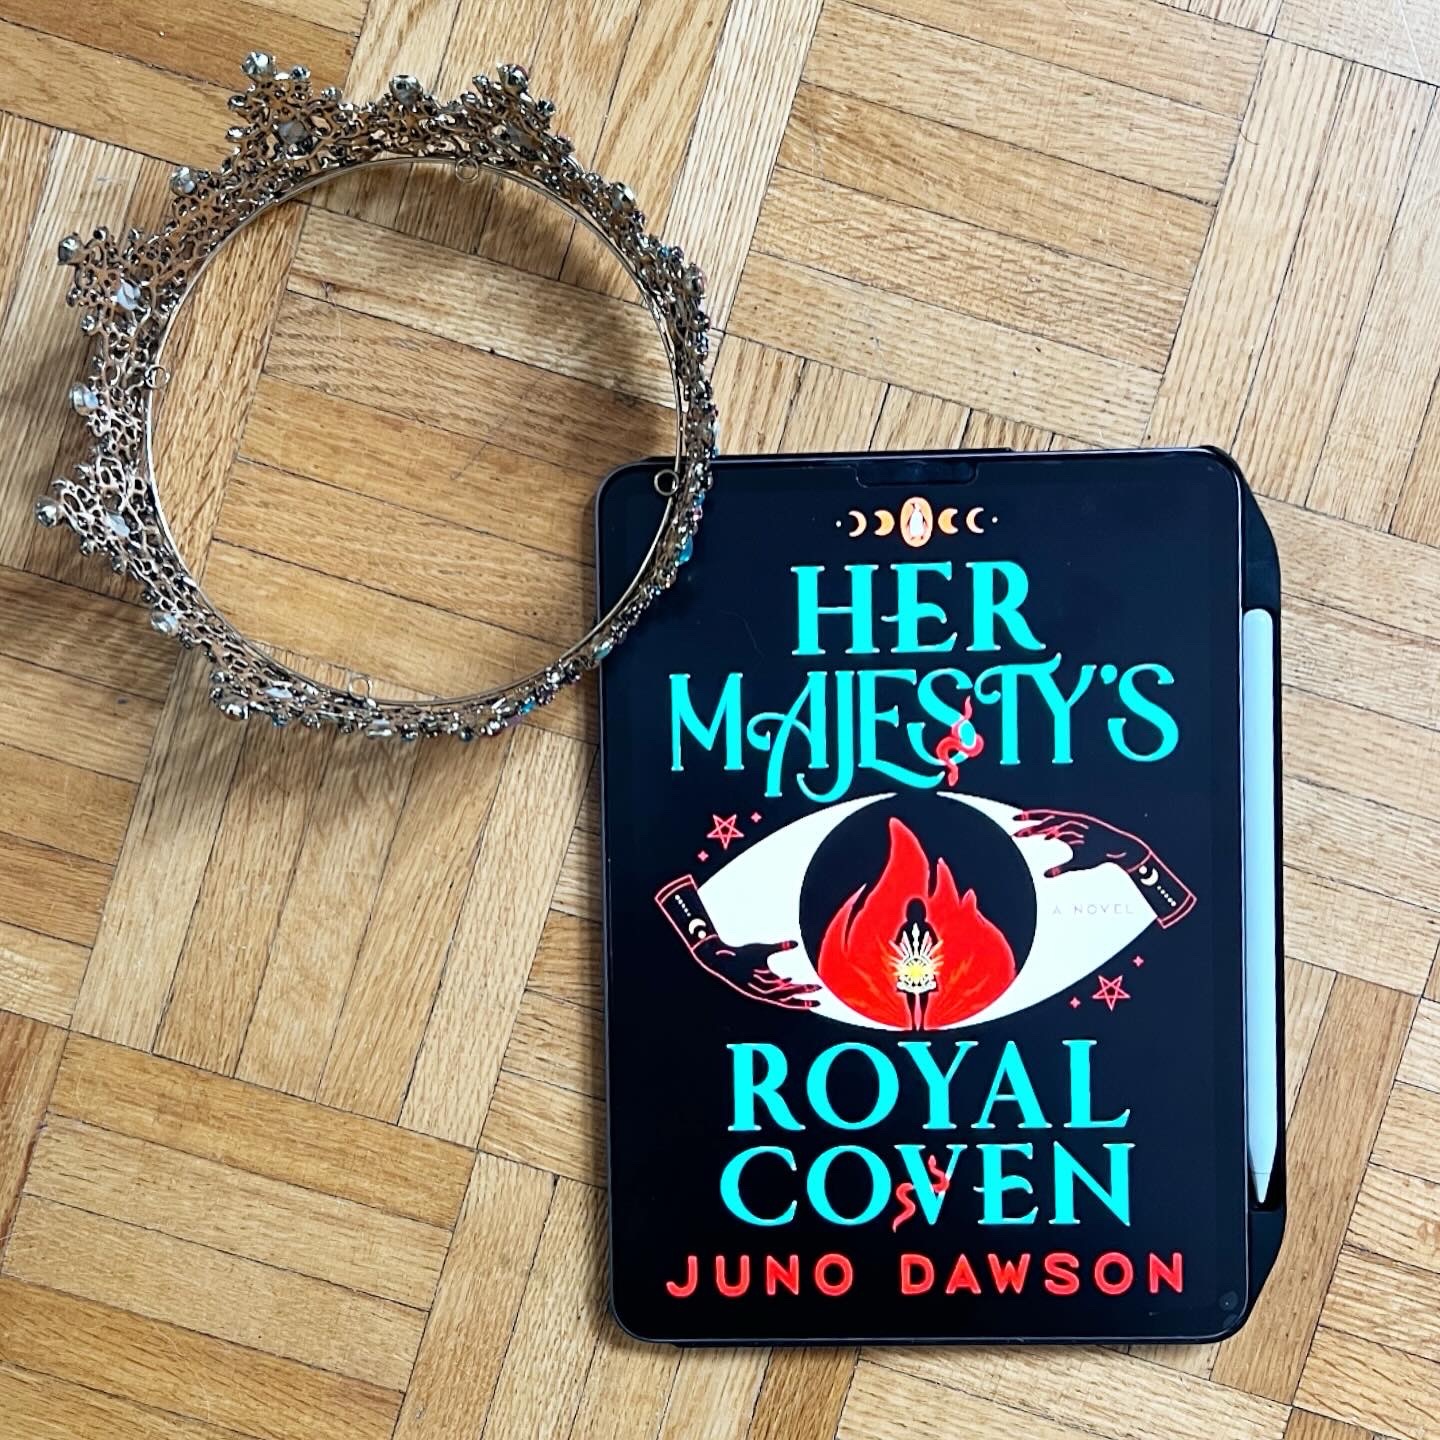 142: Her Majesty’s Royal Coven by Juno Dawson